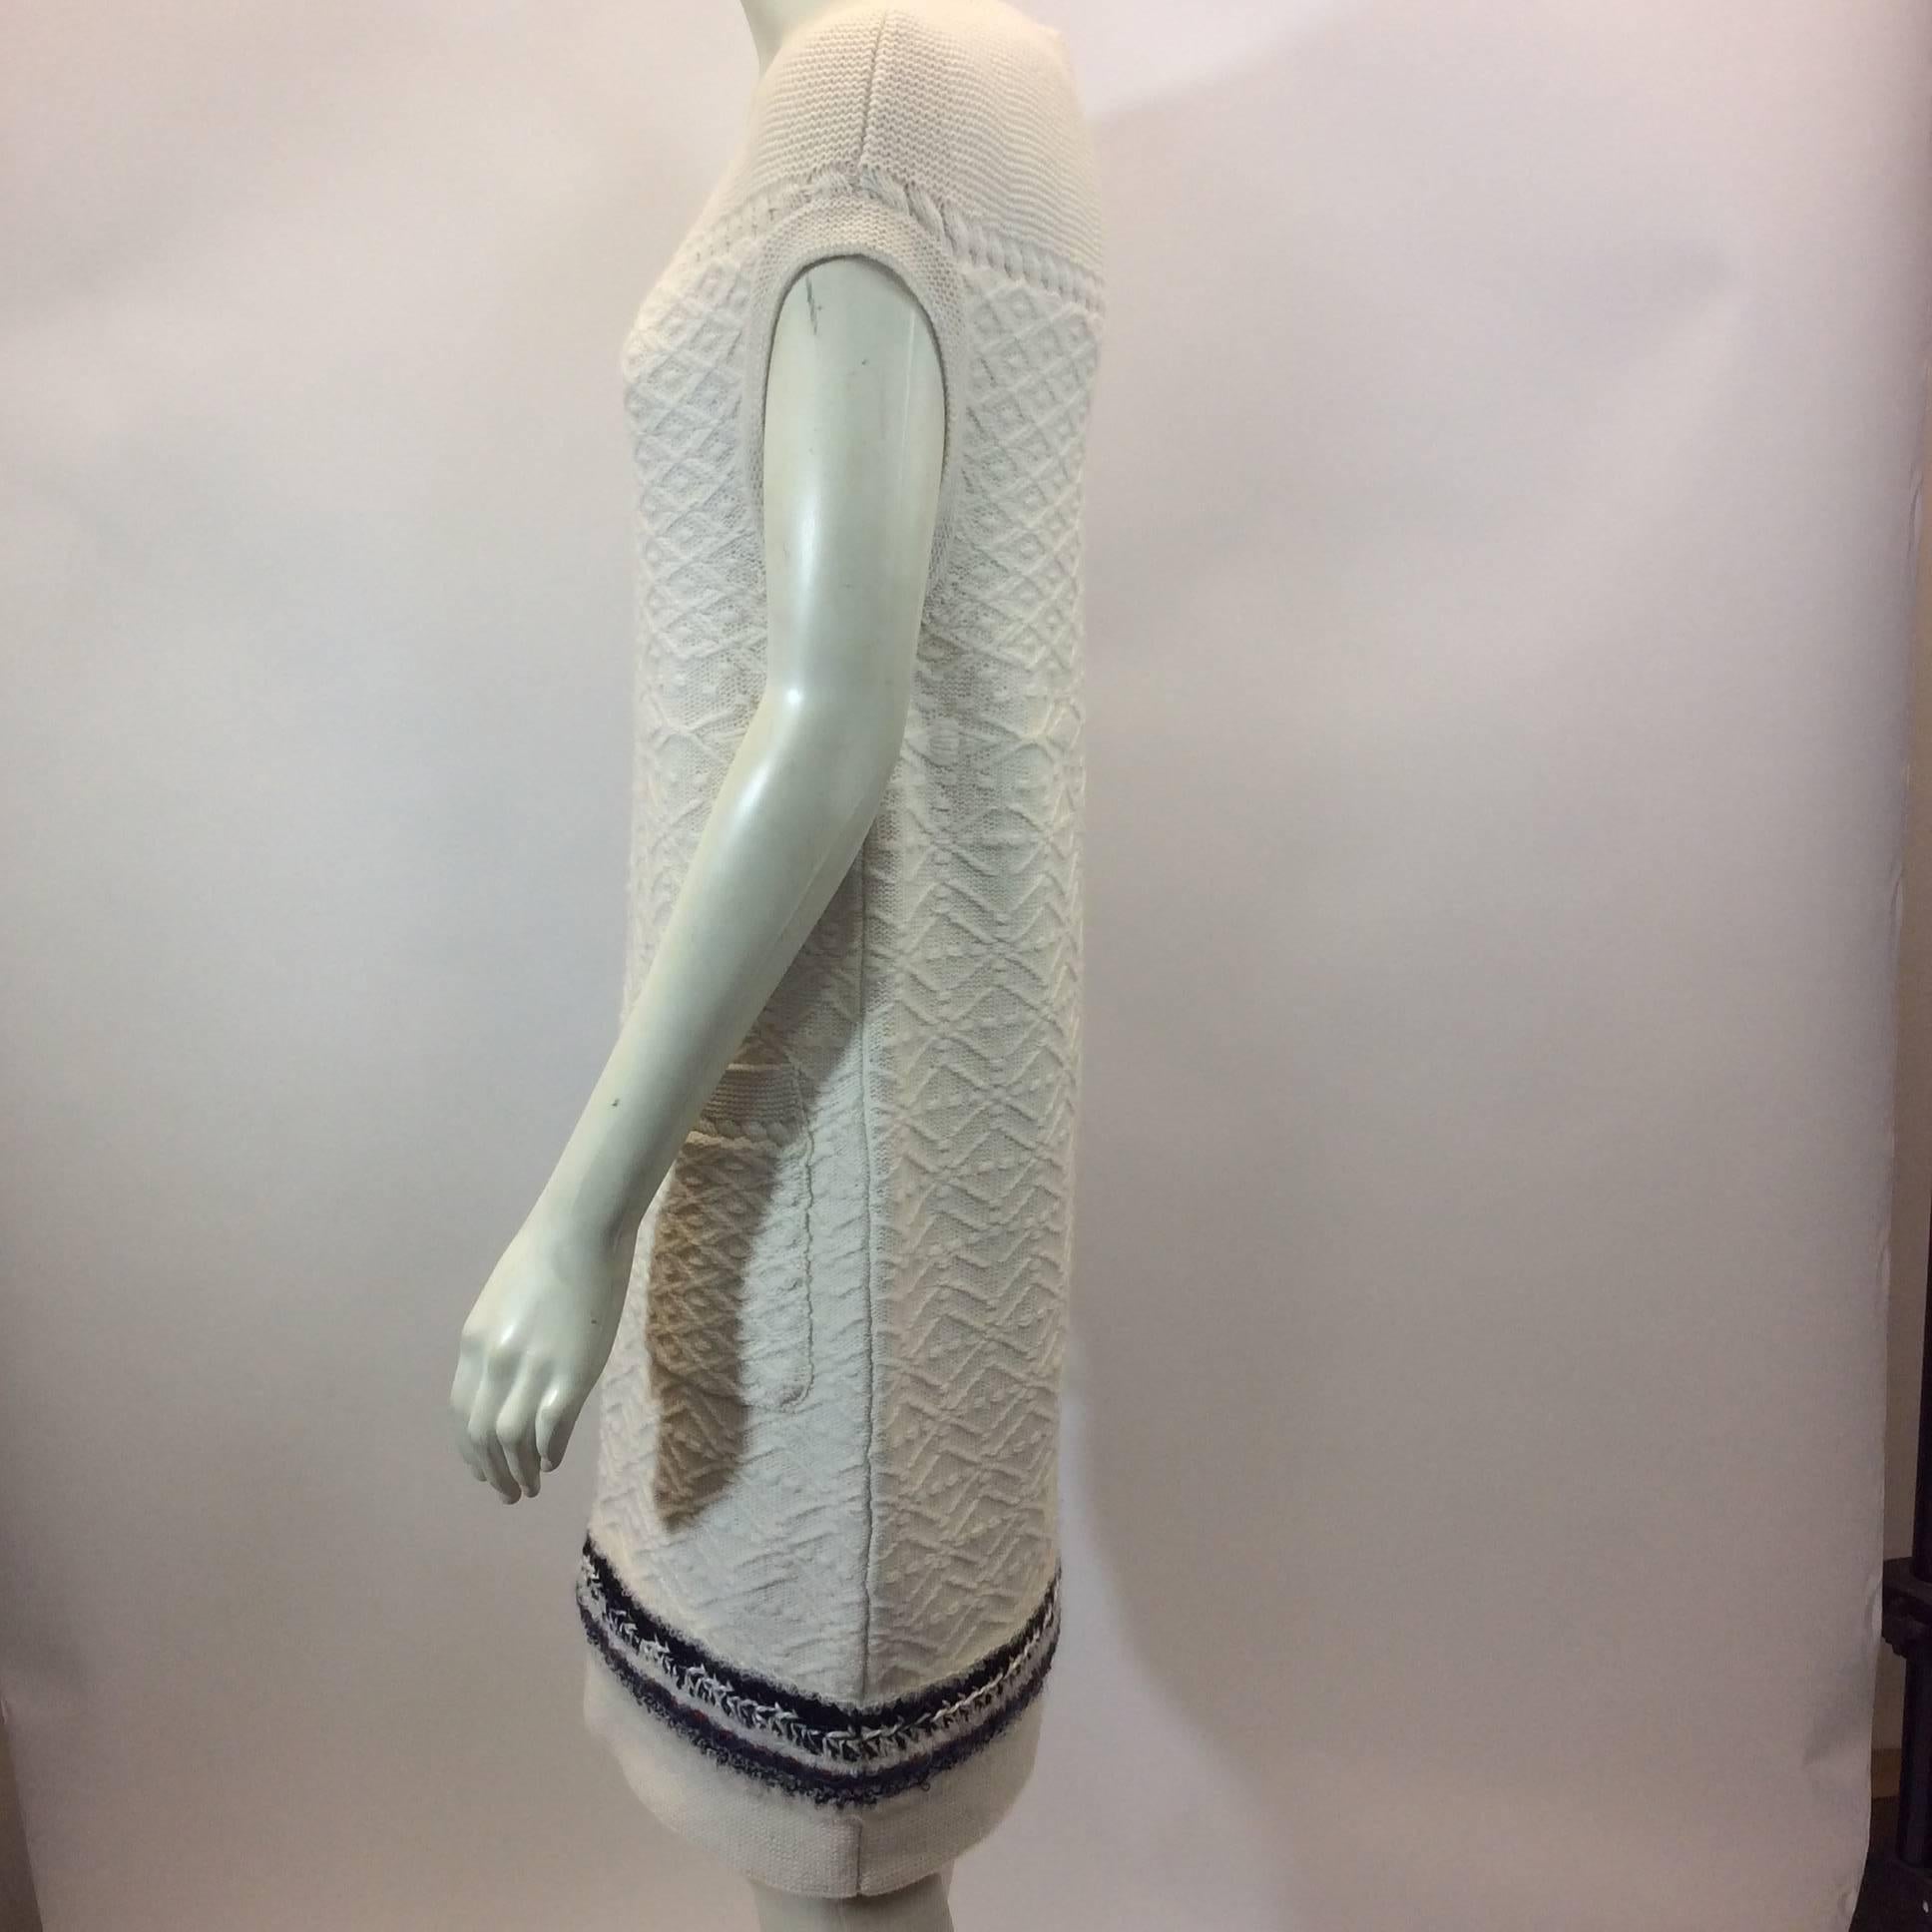 Chanel White Cashmere Knit Dress
100% Cashmere
NWT
Date Code: AW001
$2200
Size 38
Length 36